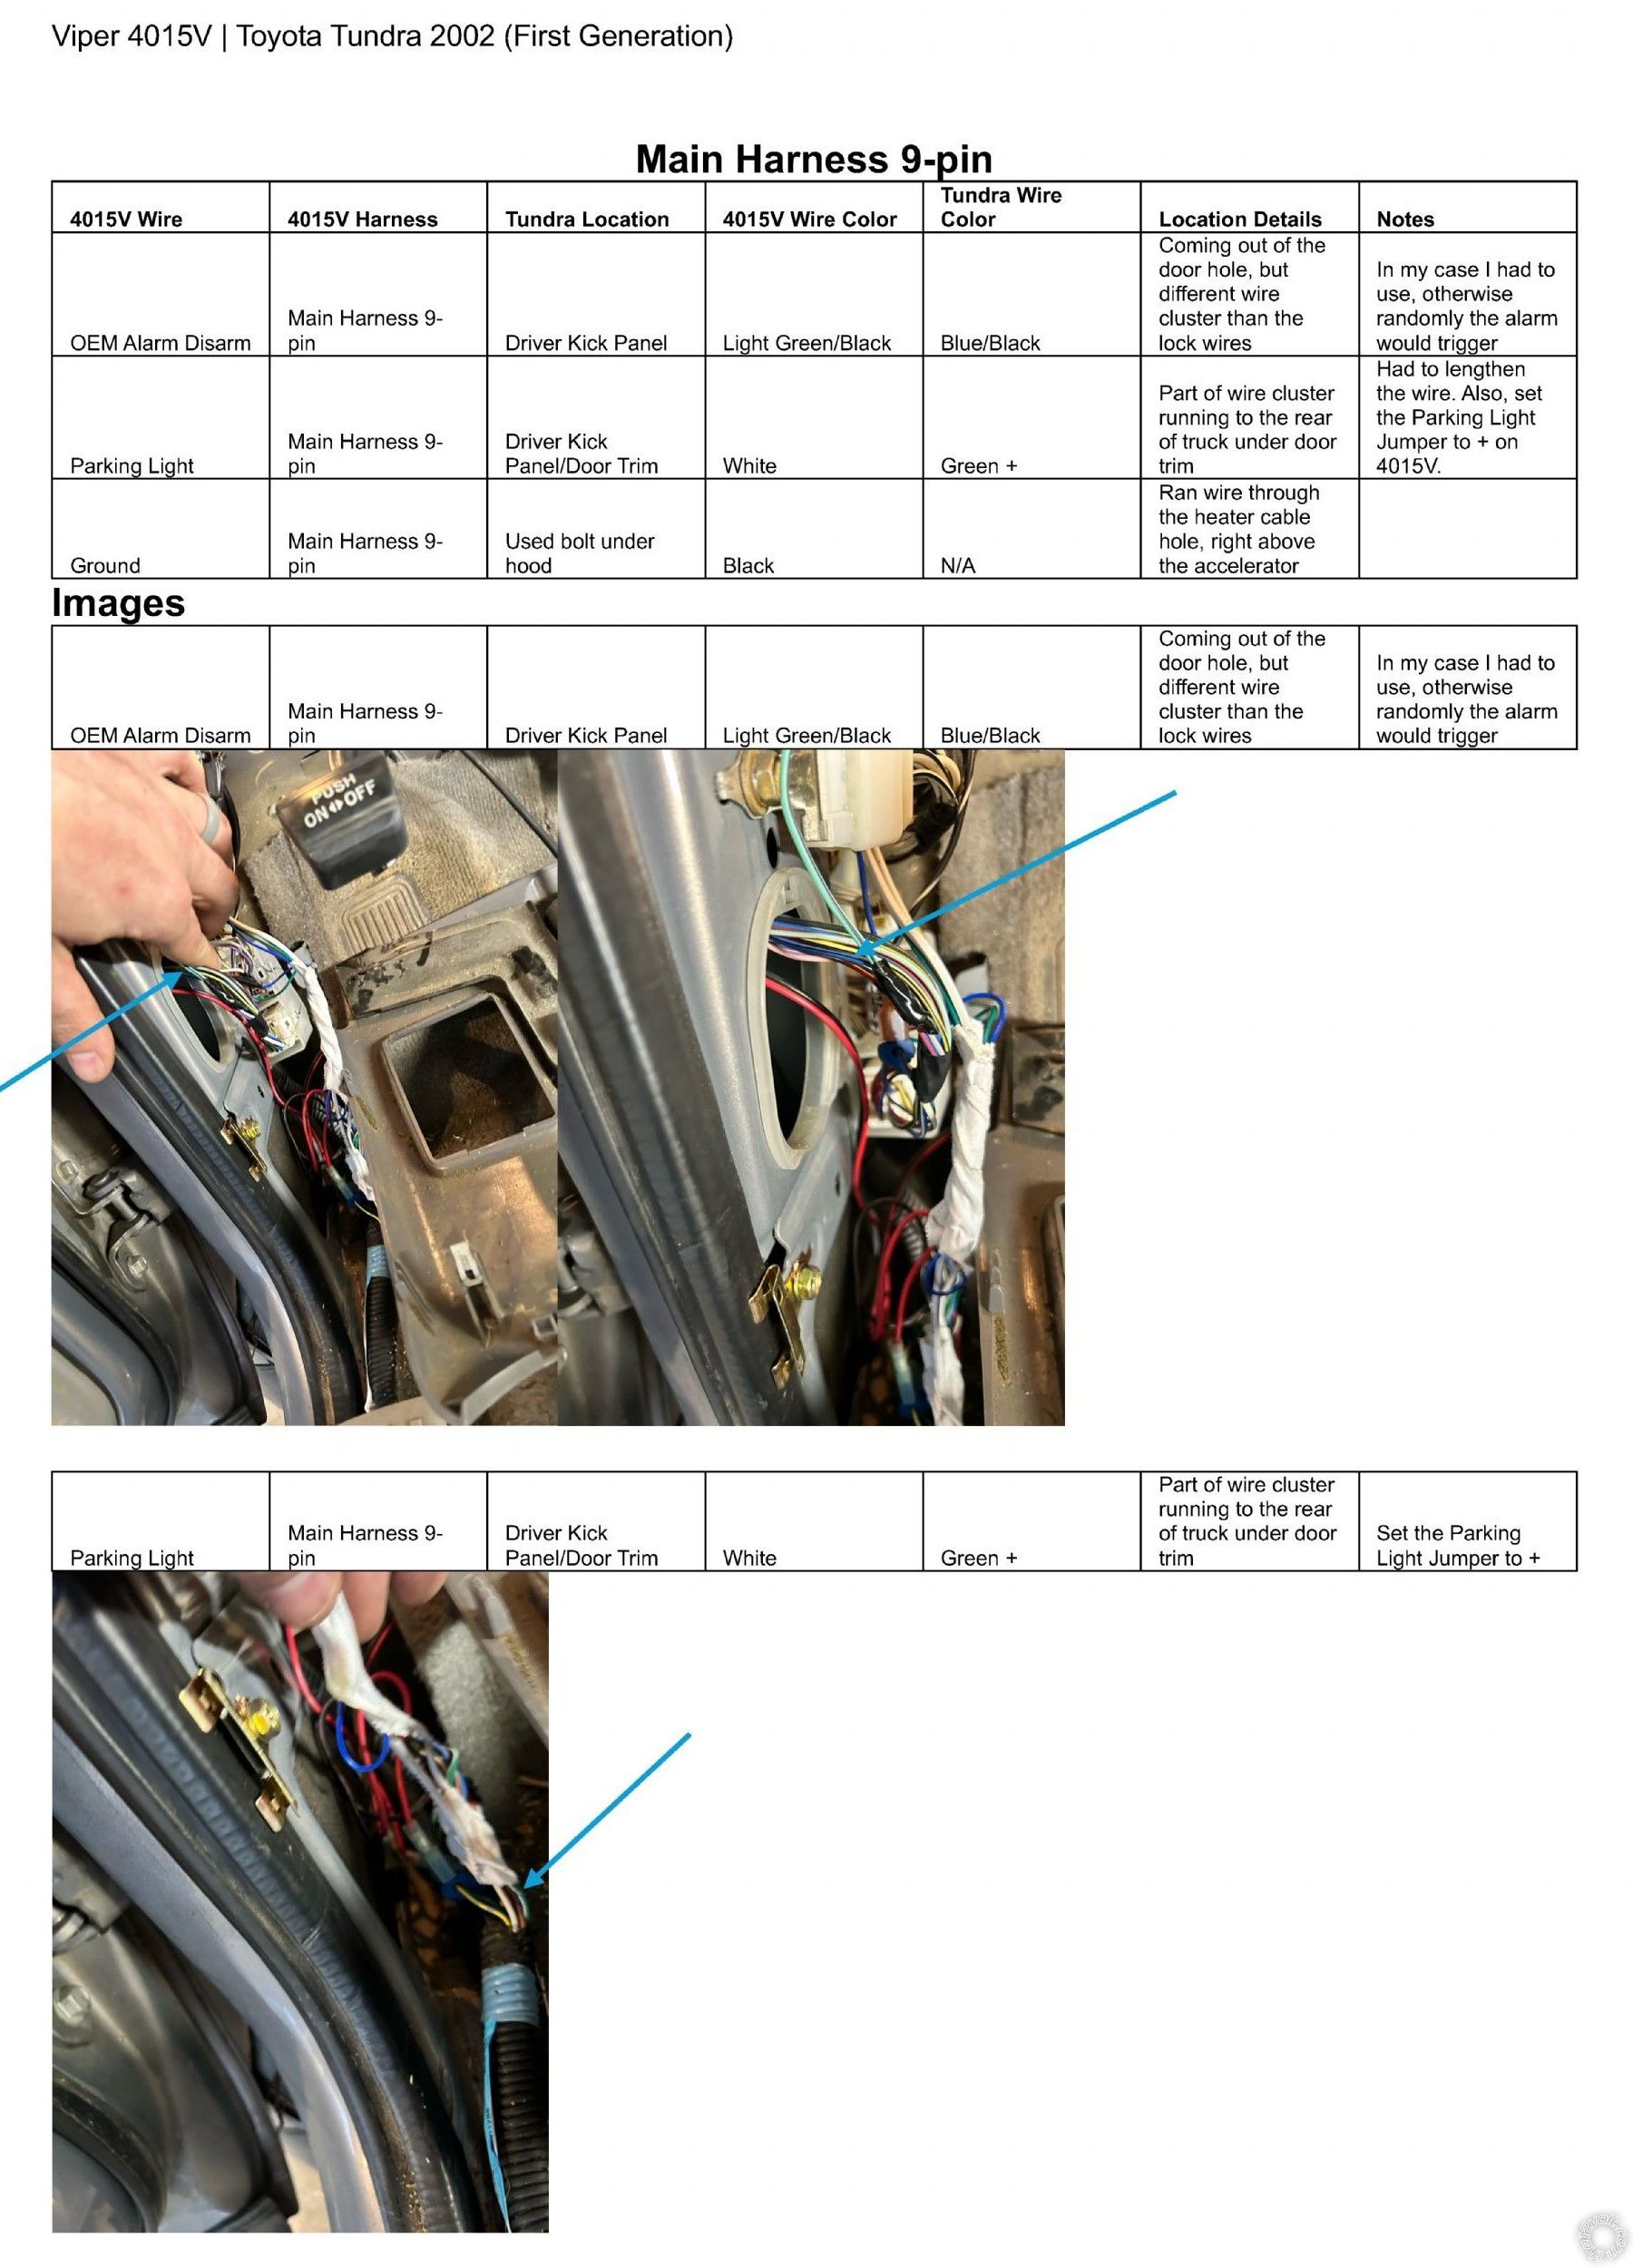 2002 Toyota Tundra, Viper 4105v Remote Start, Pictorial - Last Post -- posted image.